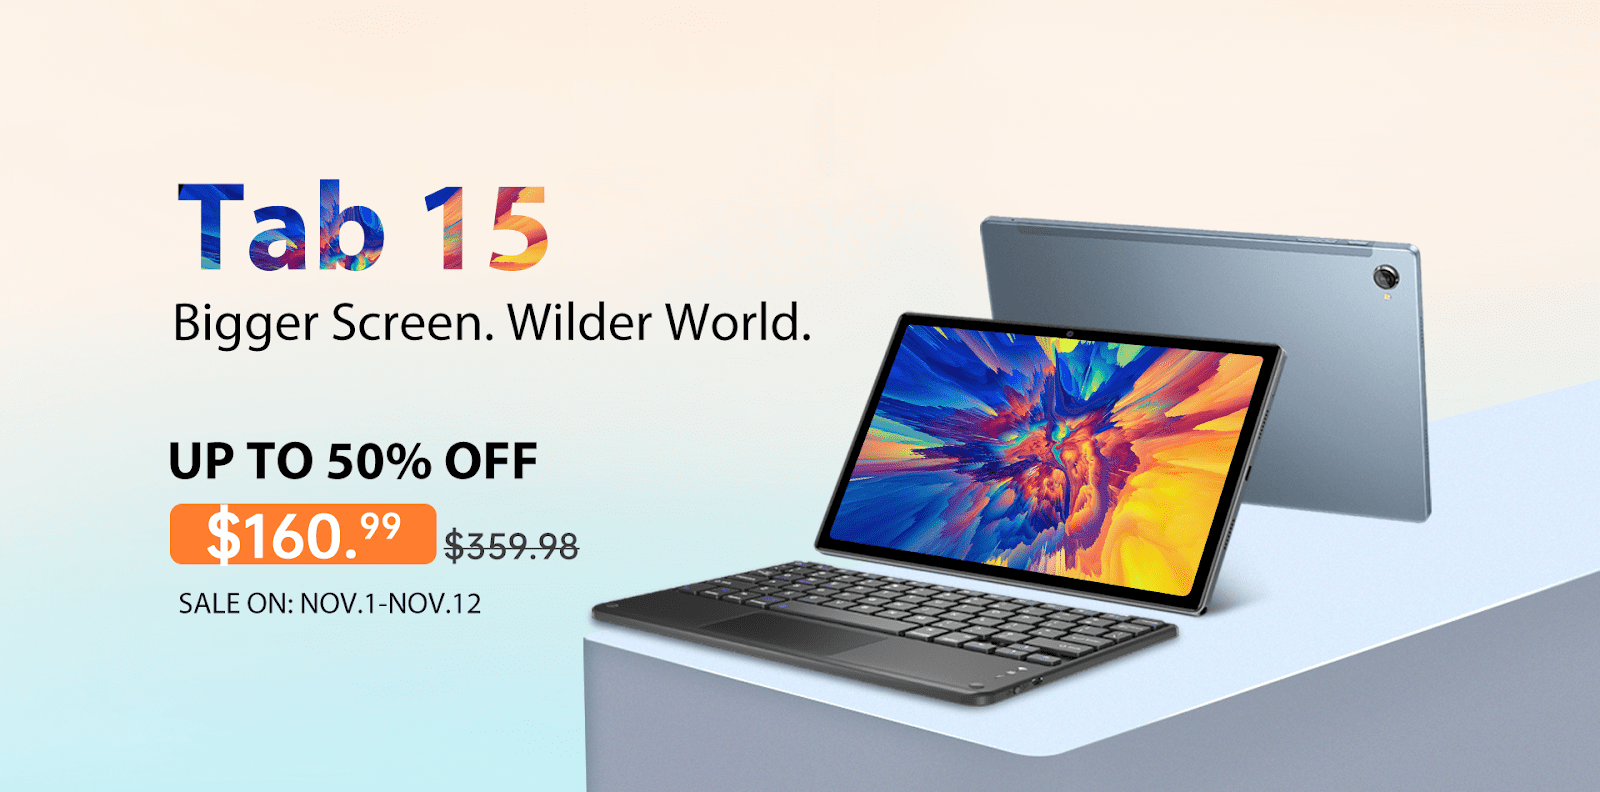 Top Blackview Deals for AliExpress 11.11 Super Sale with Up to 55% Off